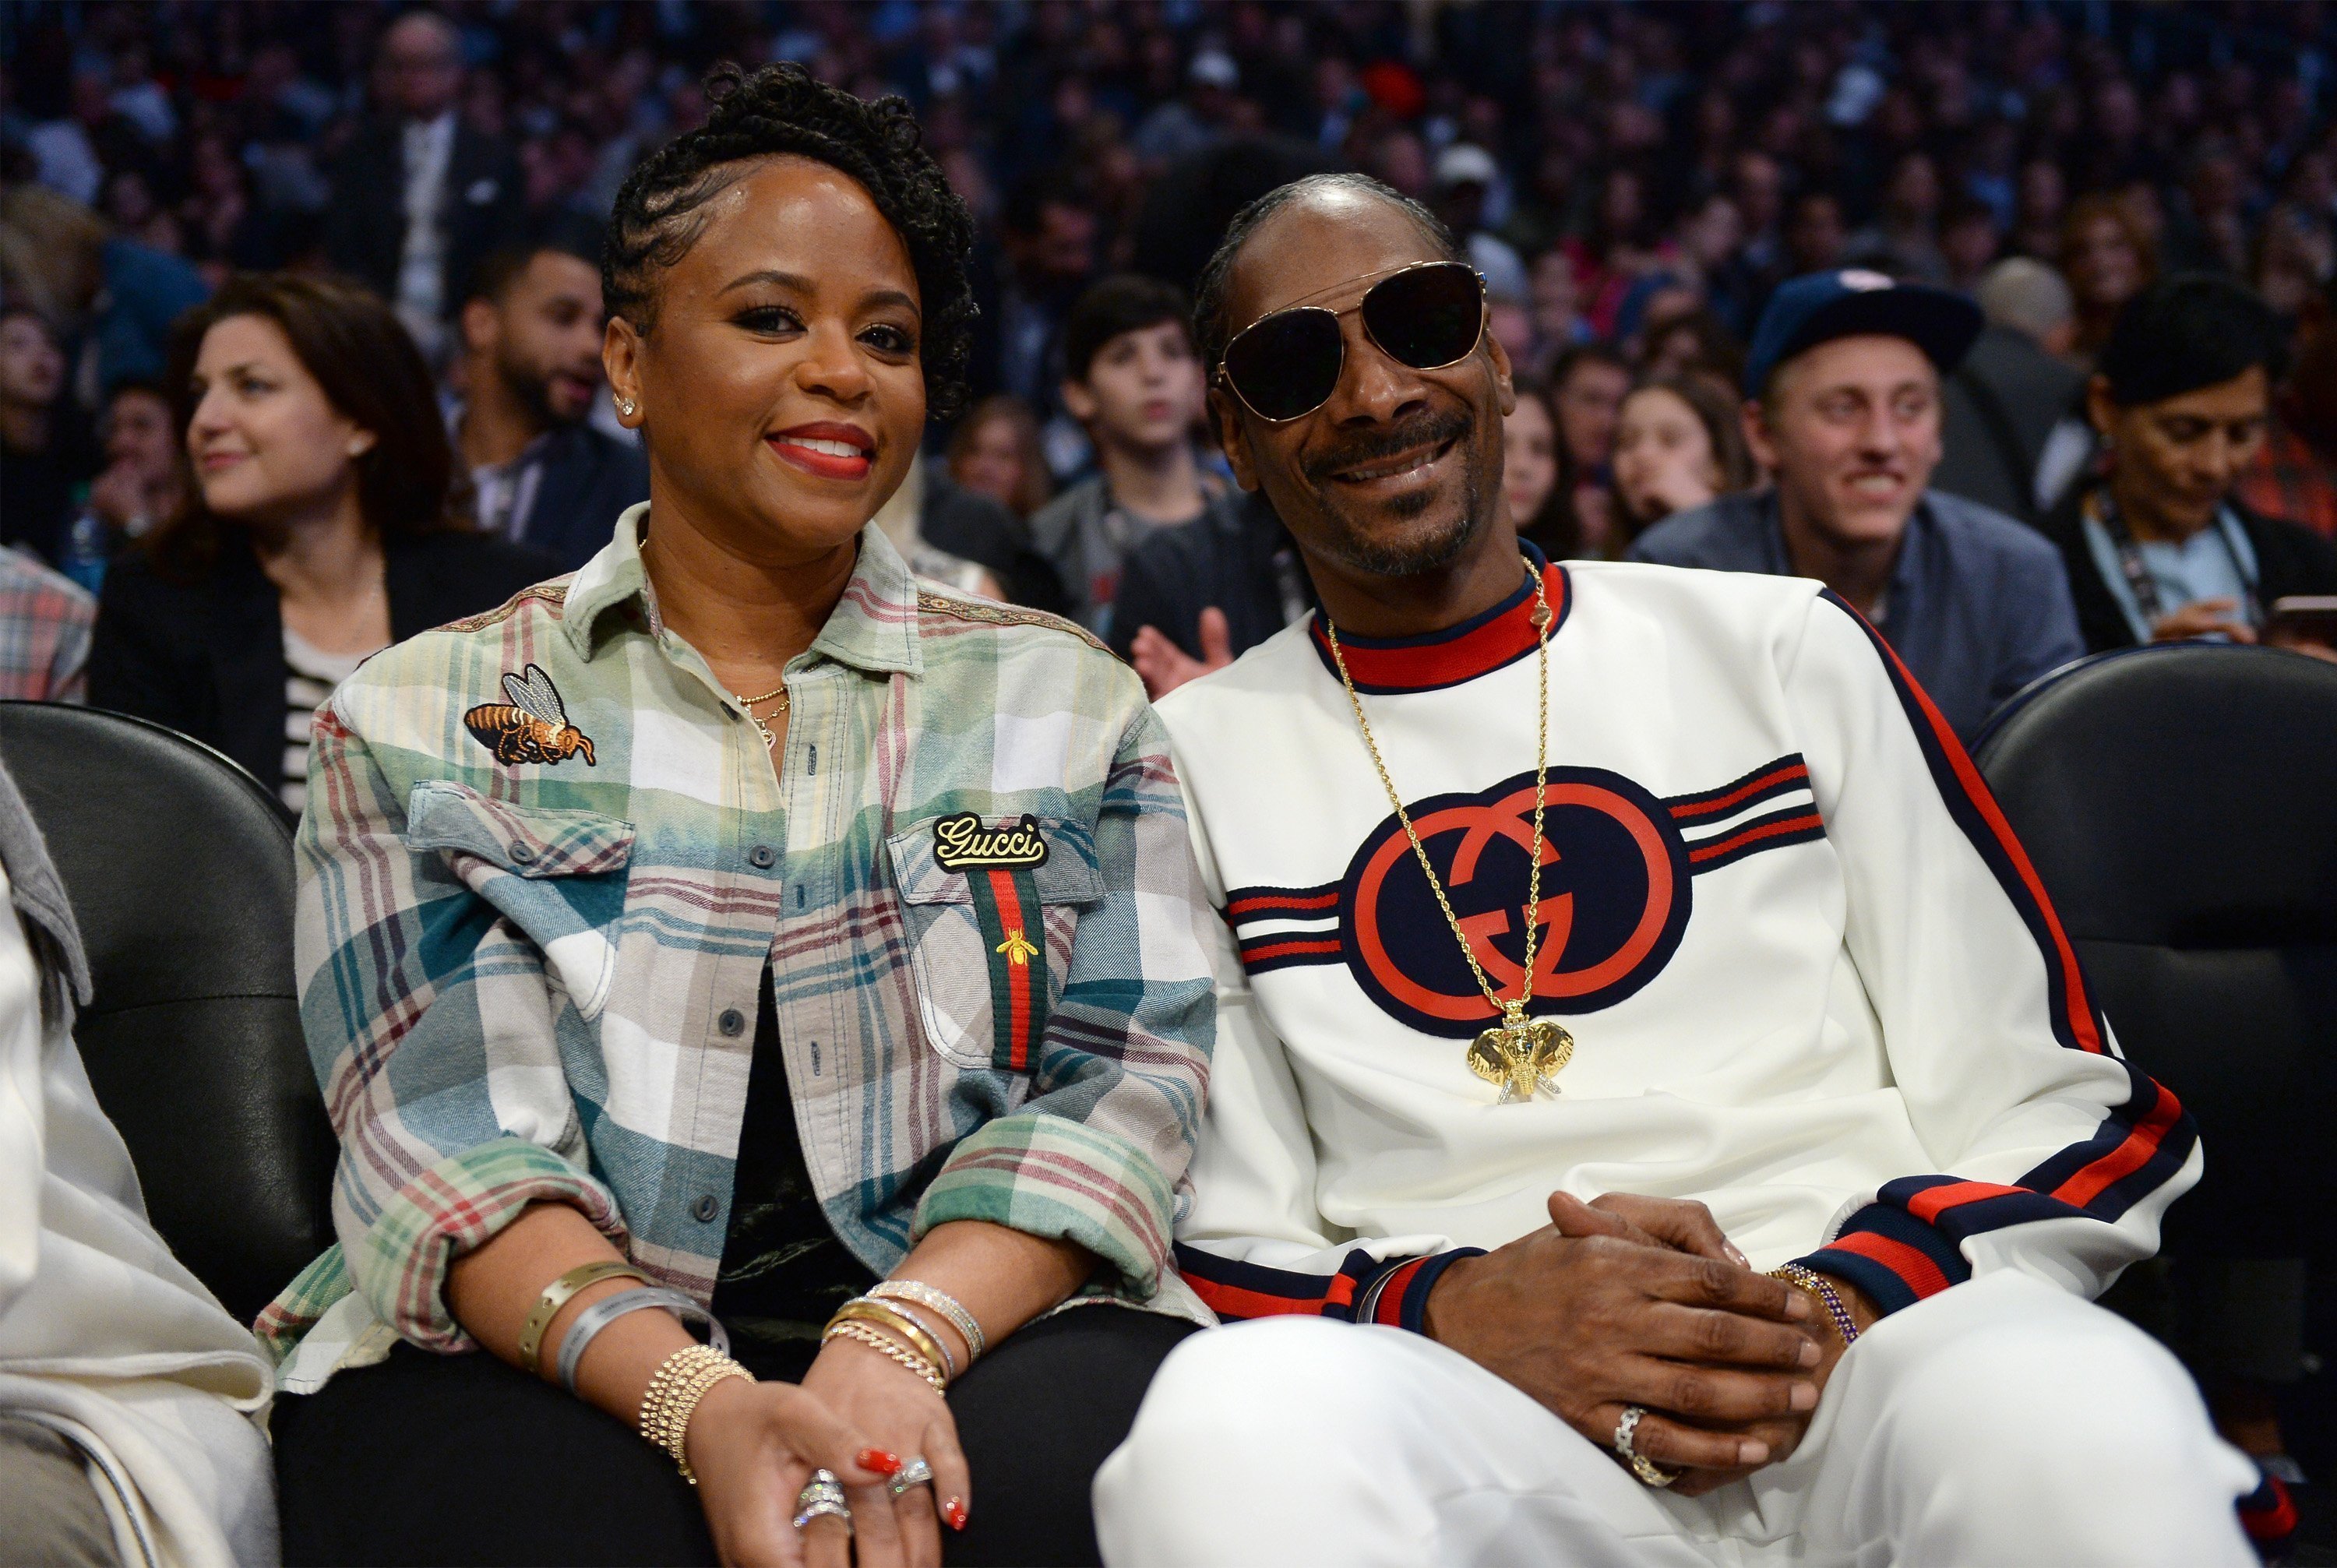 Snoop Dogg and wife Shante Broadus at the NBA All-Star Game at Staples Center on February 18, 2018. | Photo: Getty Images